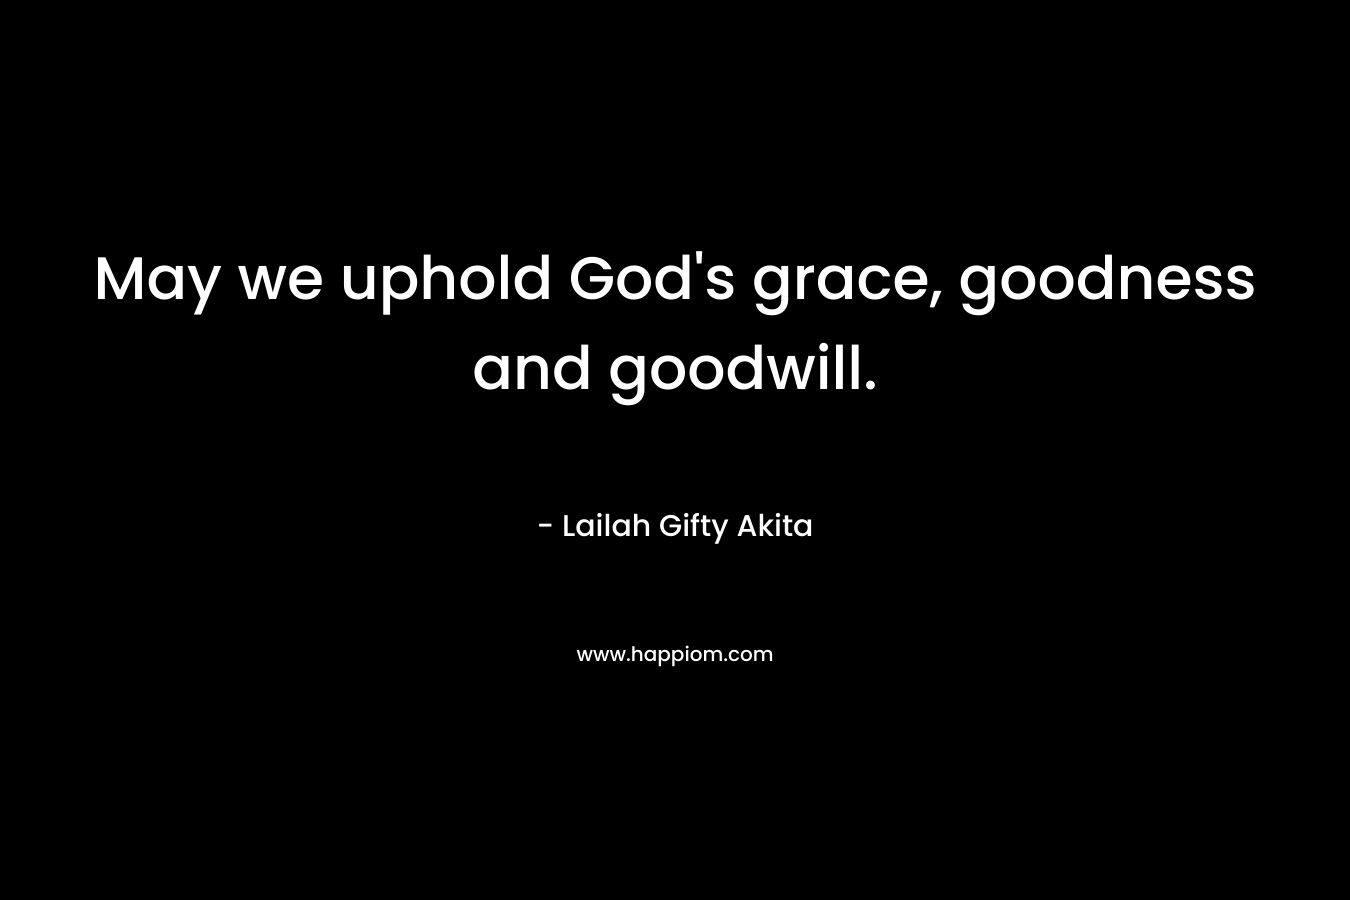 May we uphold God’s grace, goodness and goodwill. – Lailah Gifty Akita